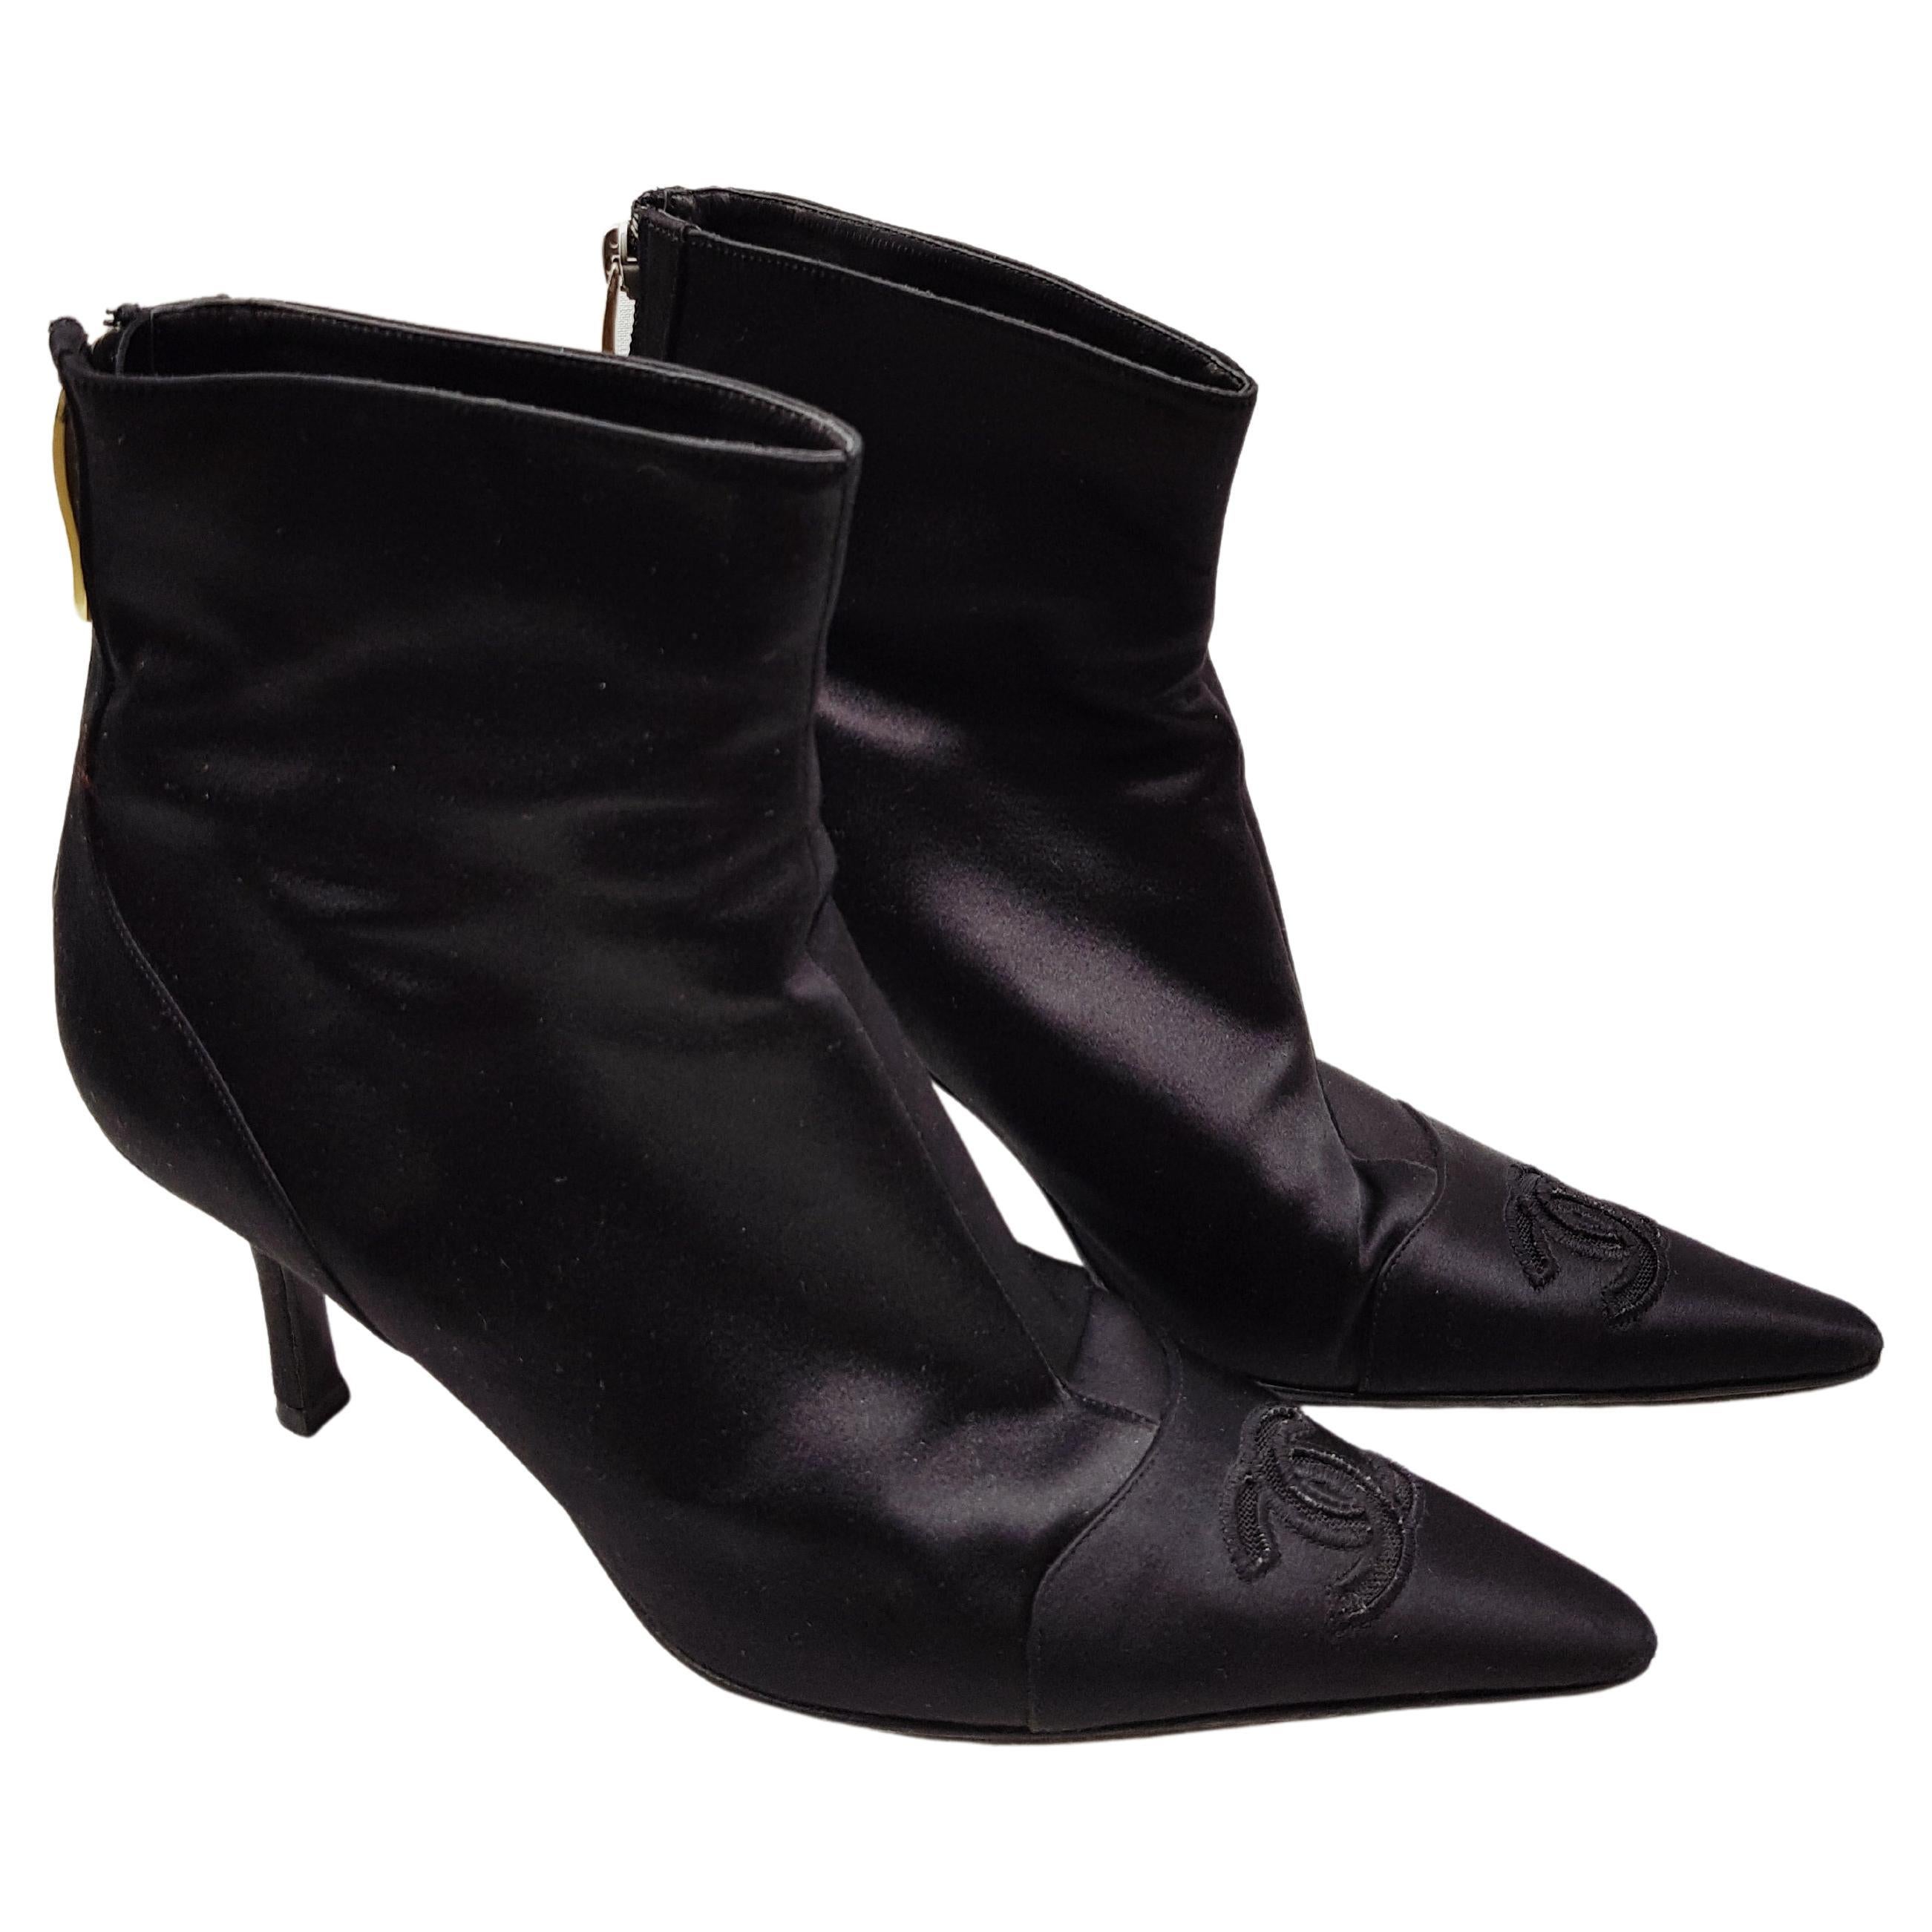 A pair of classic boots, wonderful.

-Logo CC
-Black satin fabric
-75 mm heel
-Good condition
-Size 37